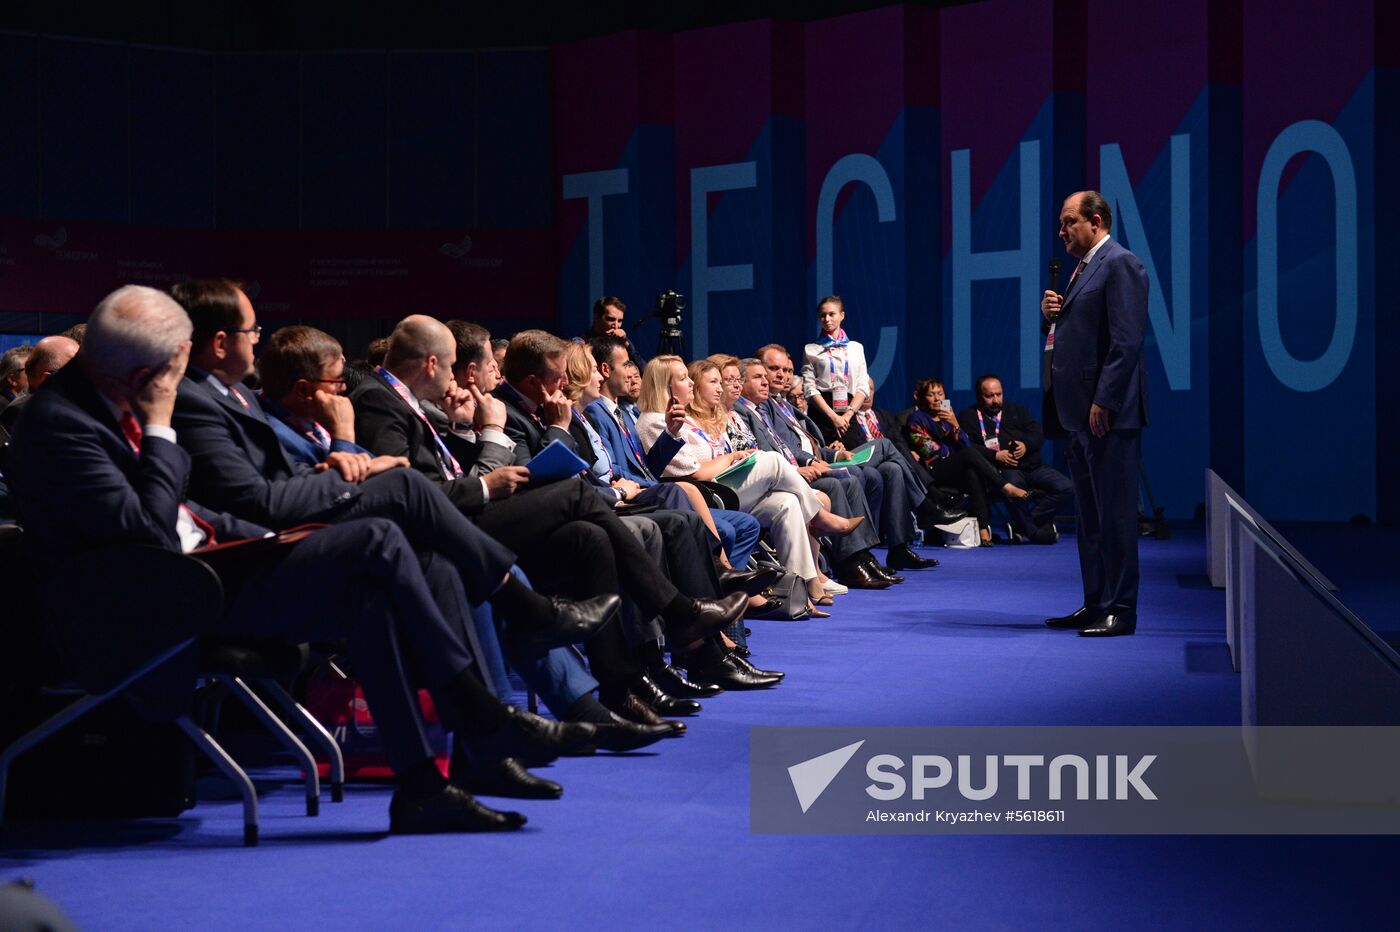 6th International Forum and Exhibition of Technological Development Technoprom 2018